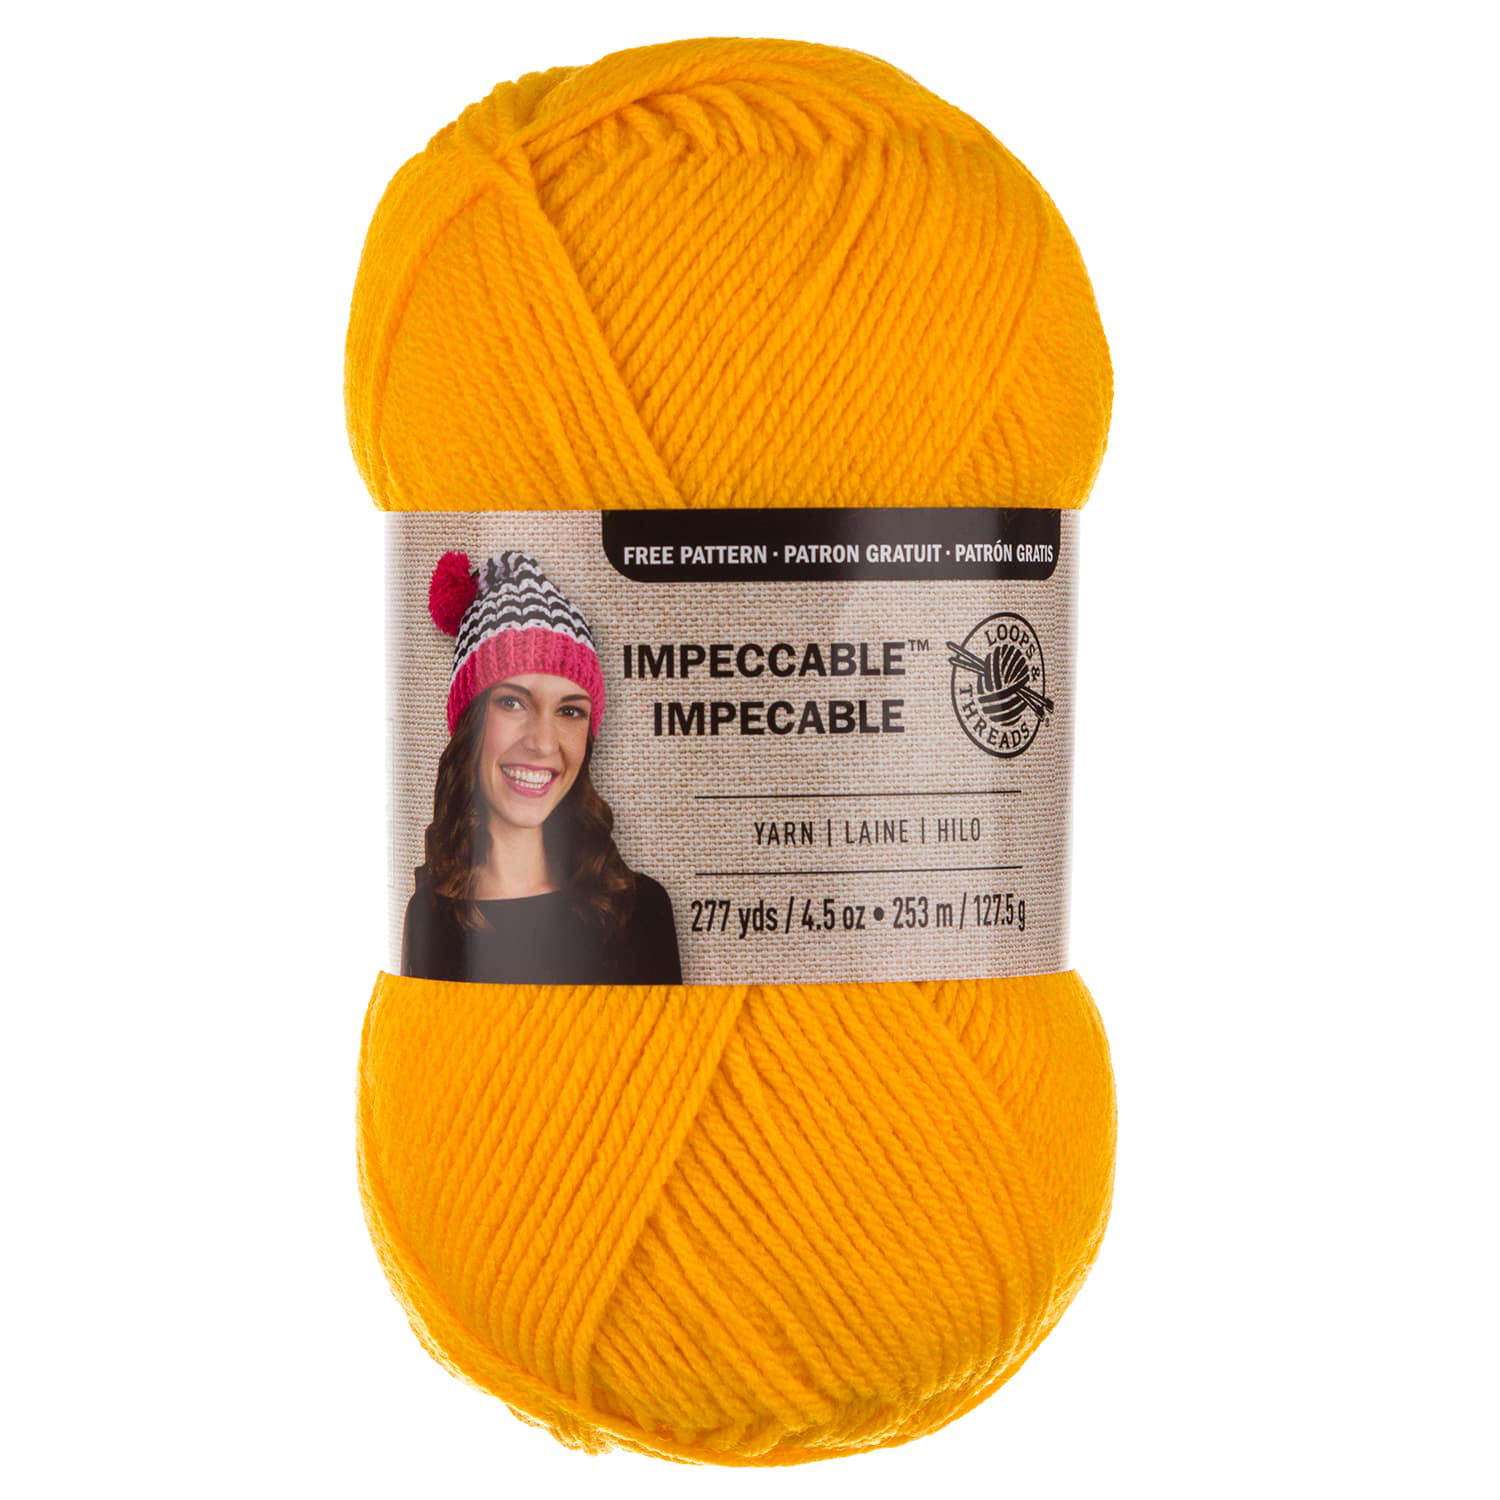 Loops & Threads Solid Impeccable Yarn - 4.5 oz